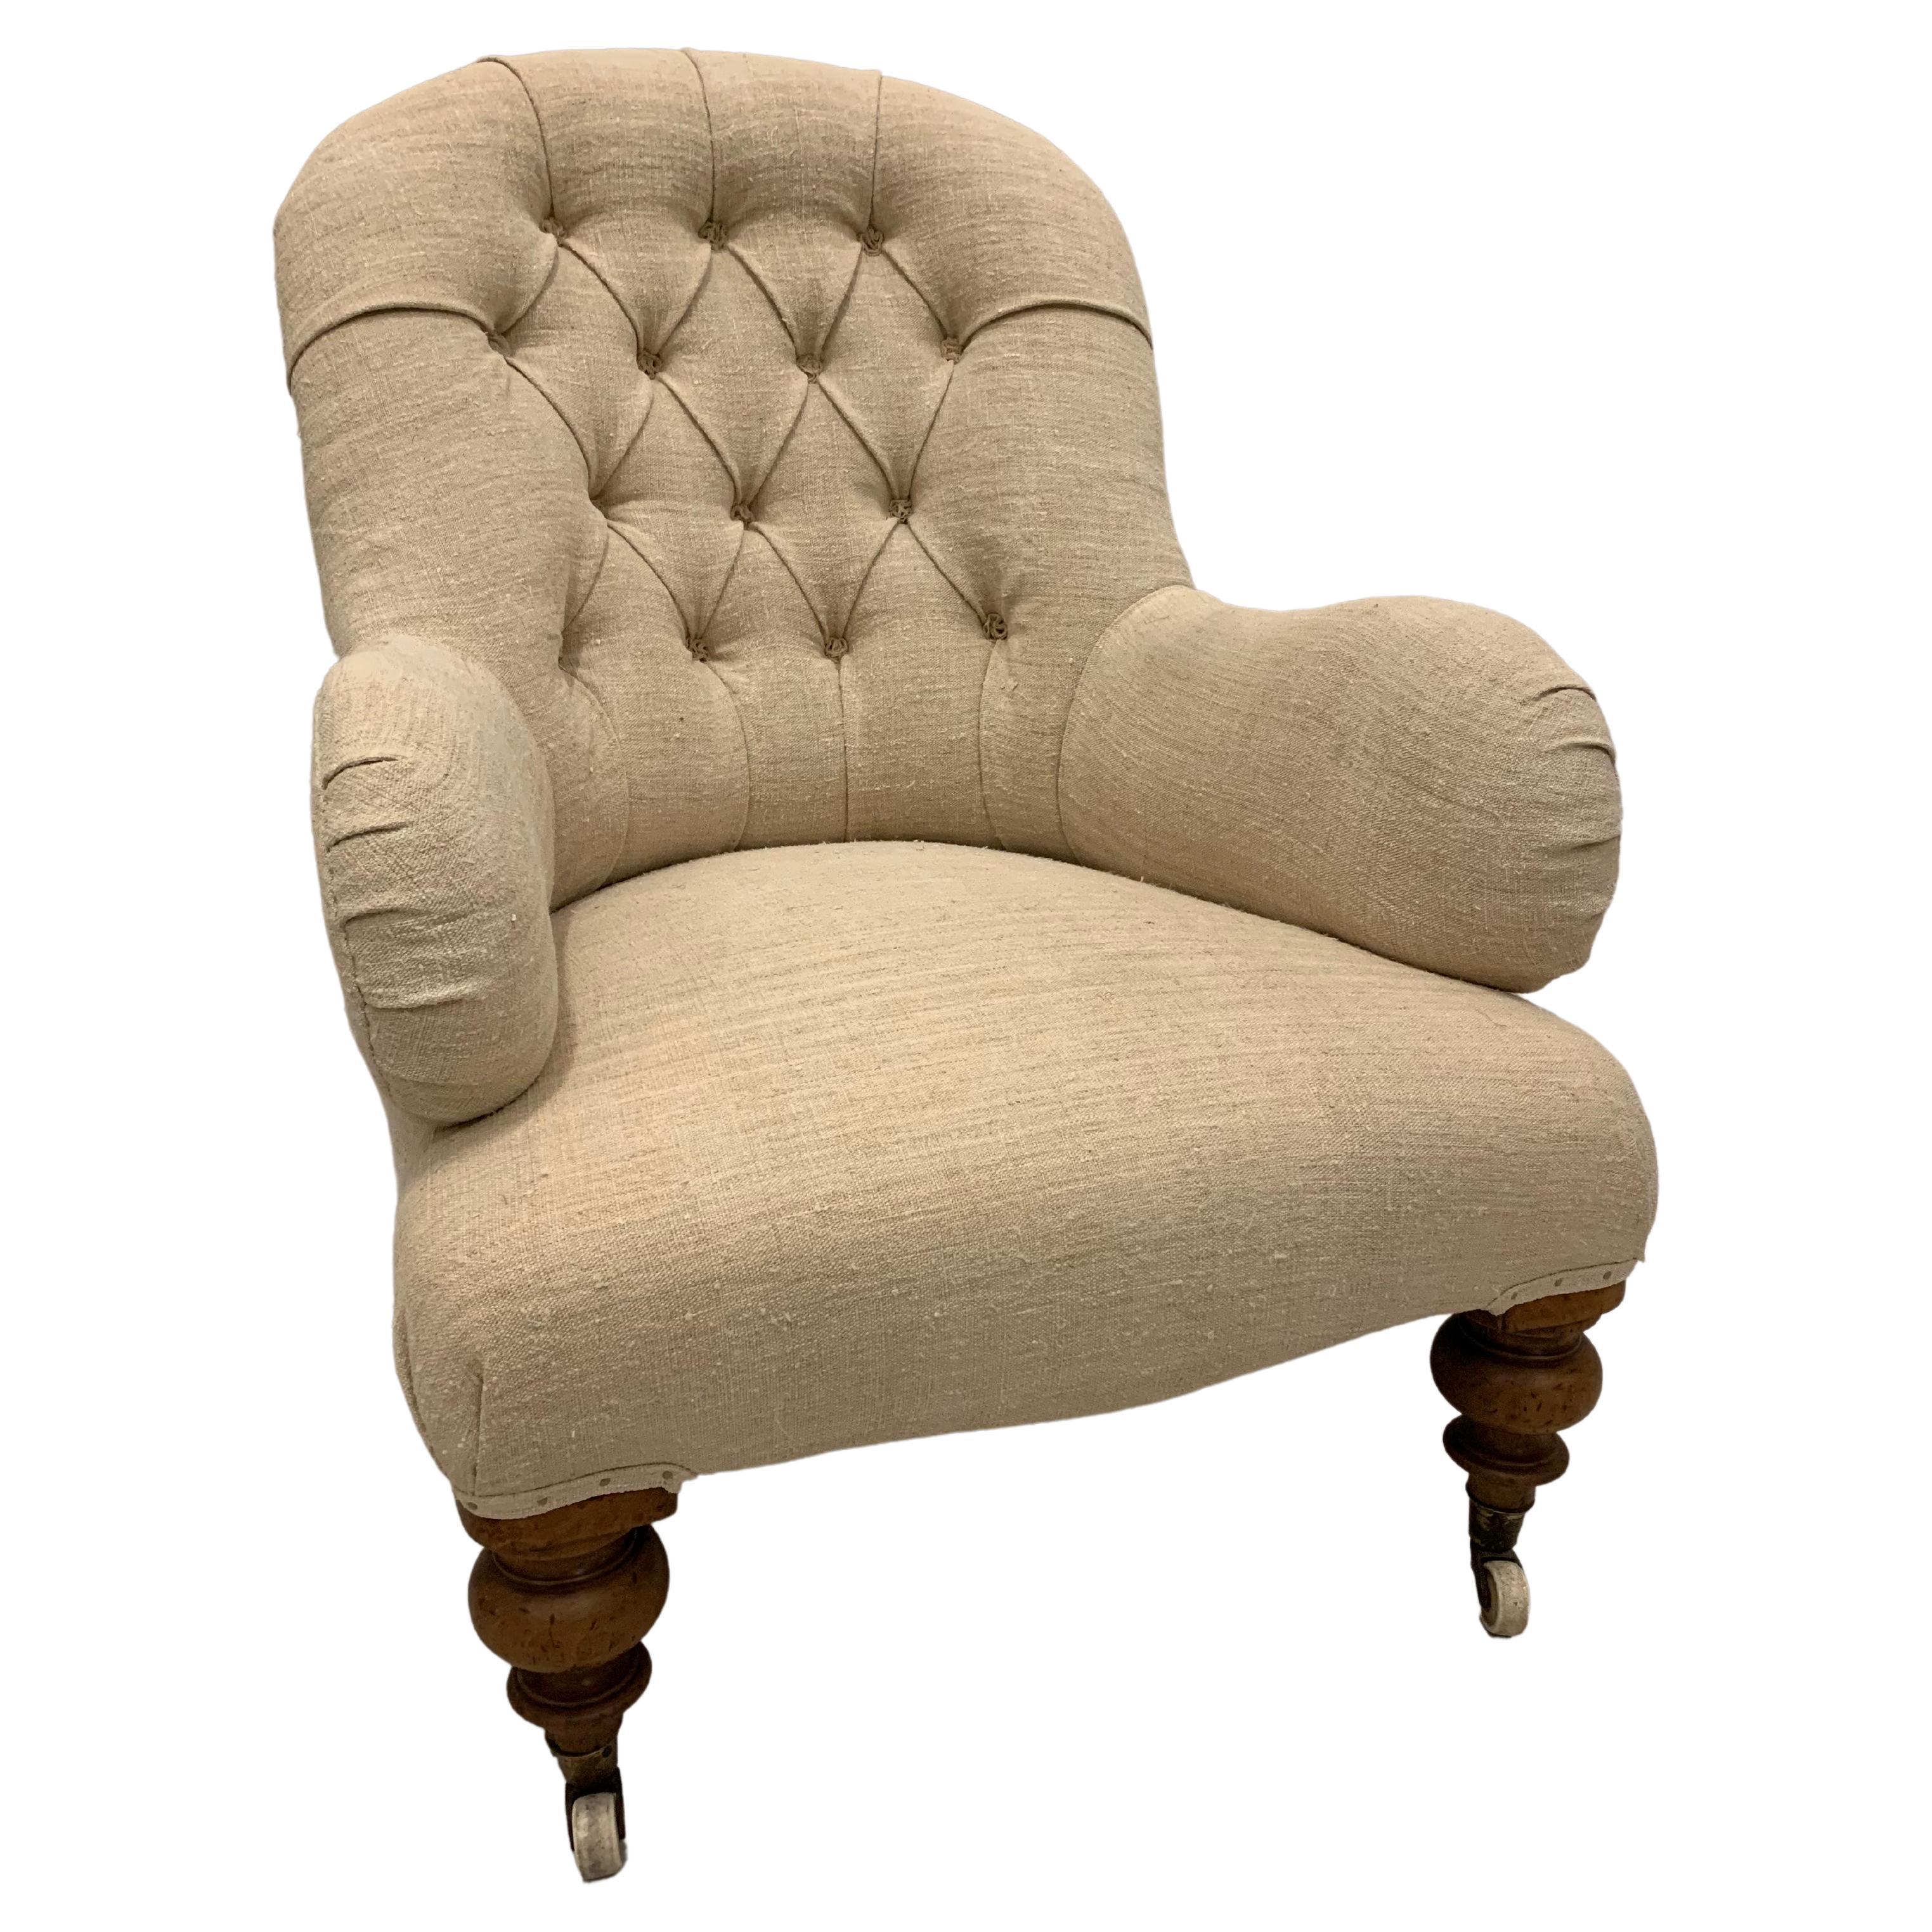 Circa 19th Century English Upholstered Buttoned Back Armchair in French Linen For Sale